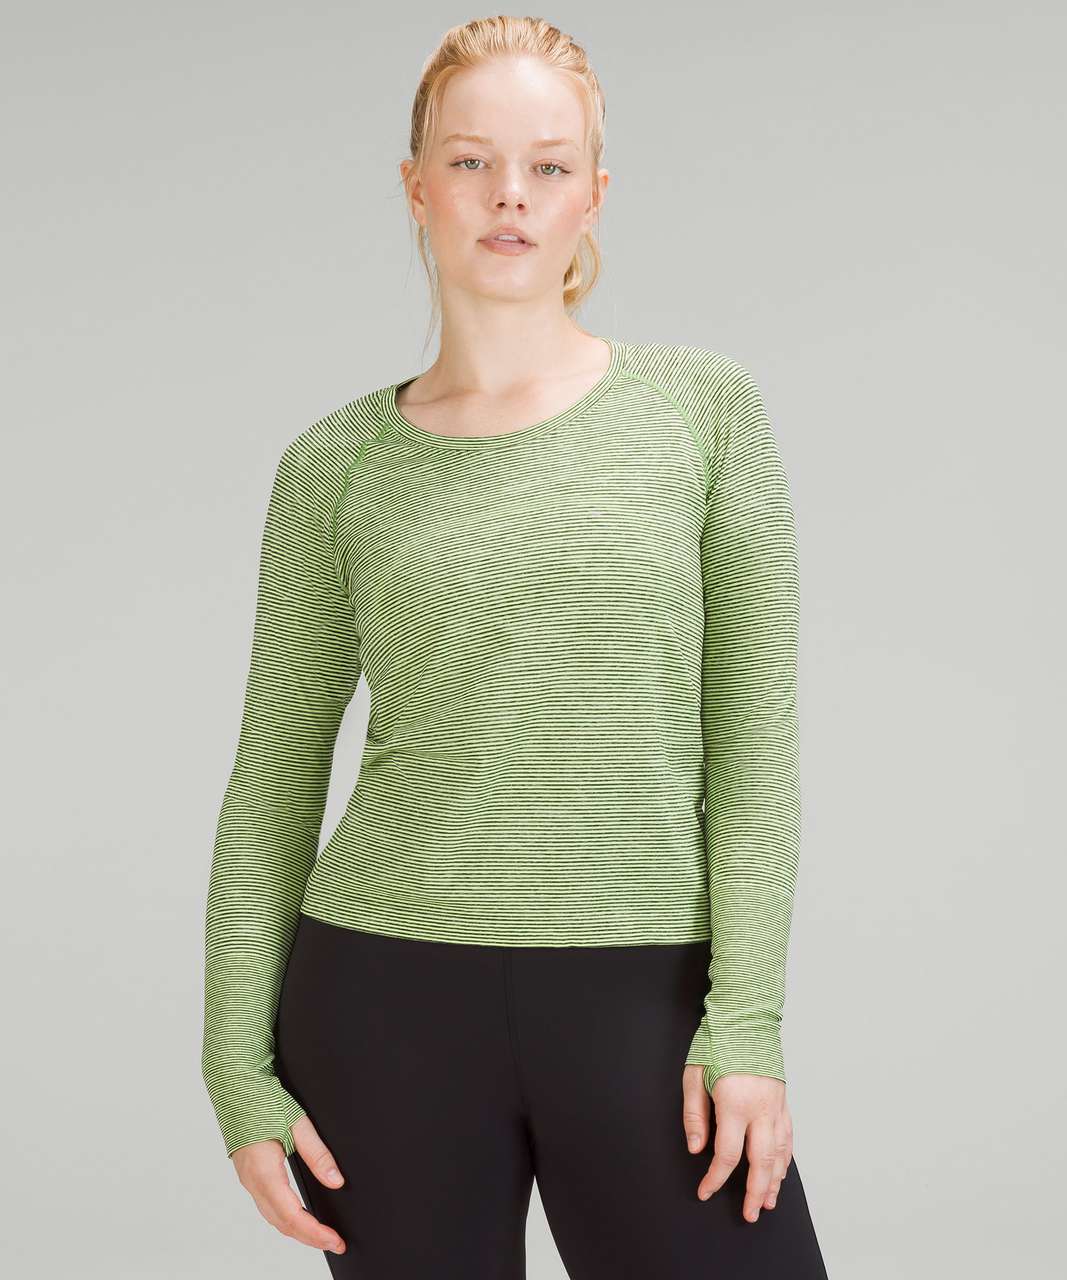 Lululemon Swiftly Tech Long Sleeve Shirt 2.0 *Race Length - Wee Are From Space Faded Zap